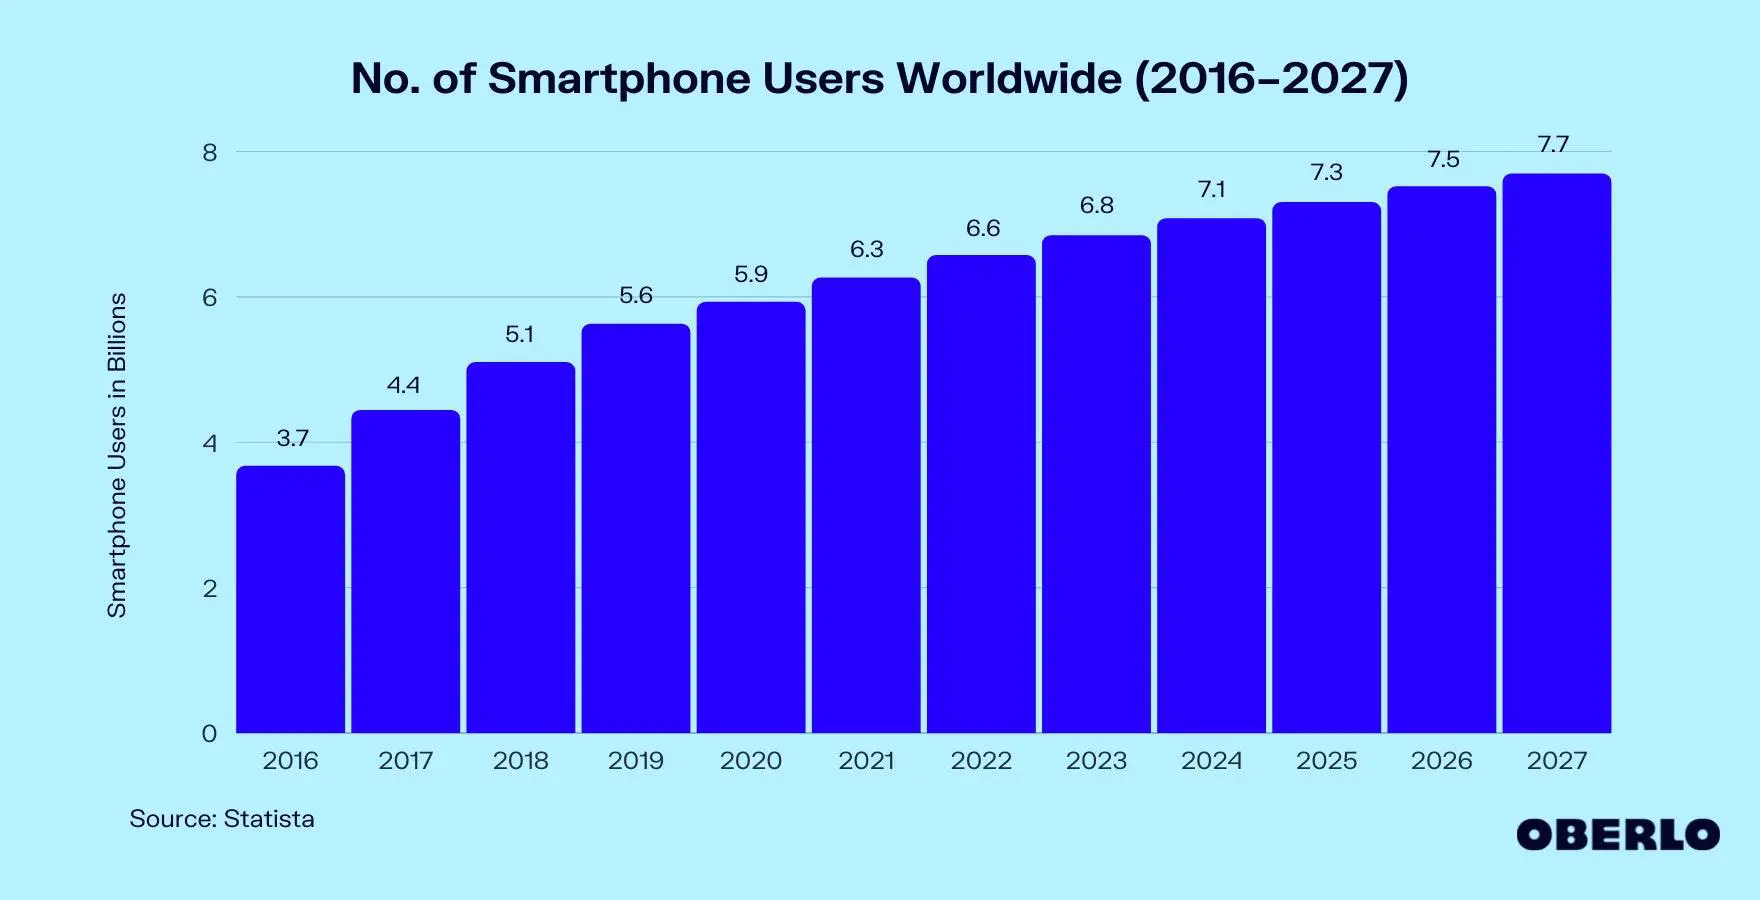 AM: Number of smartphone users globally